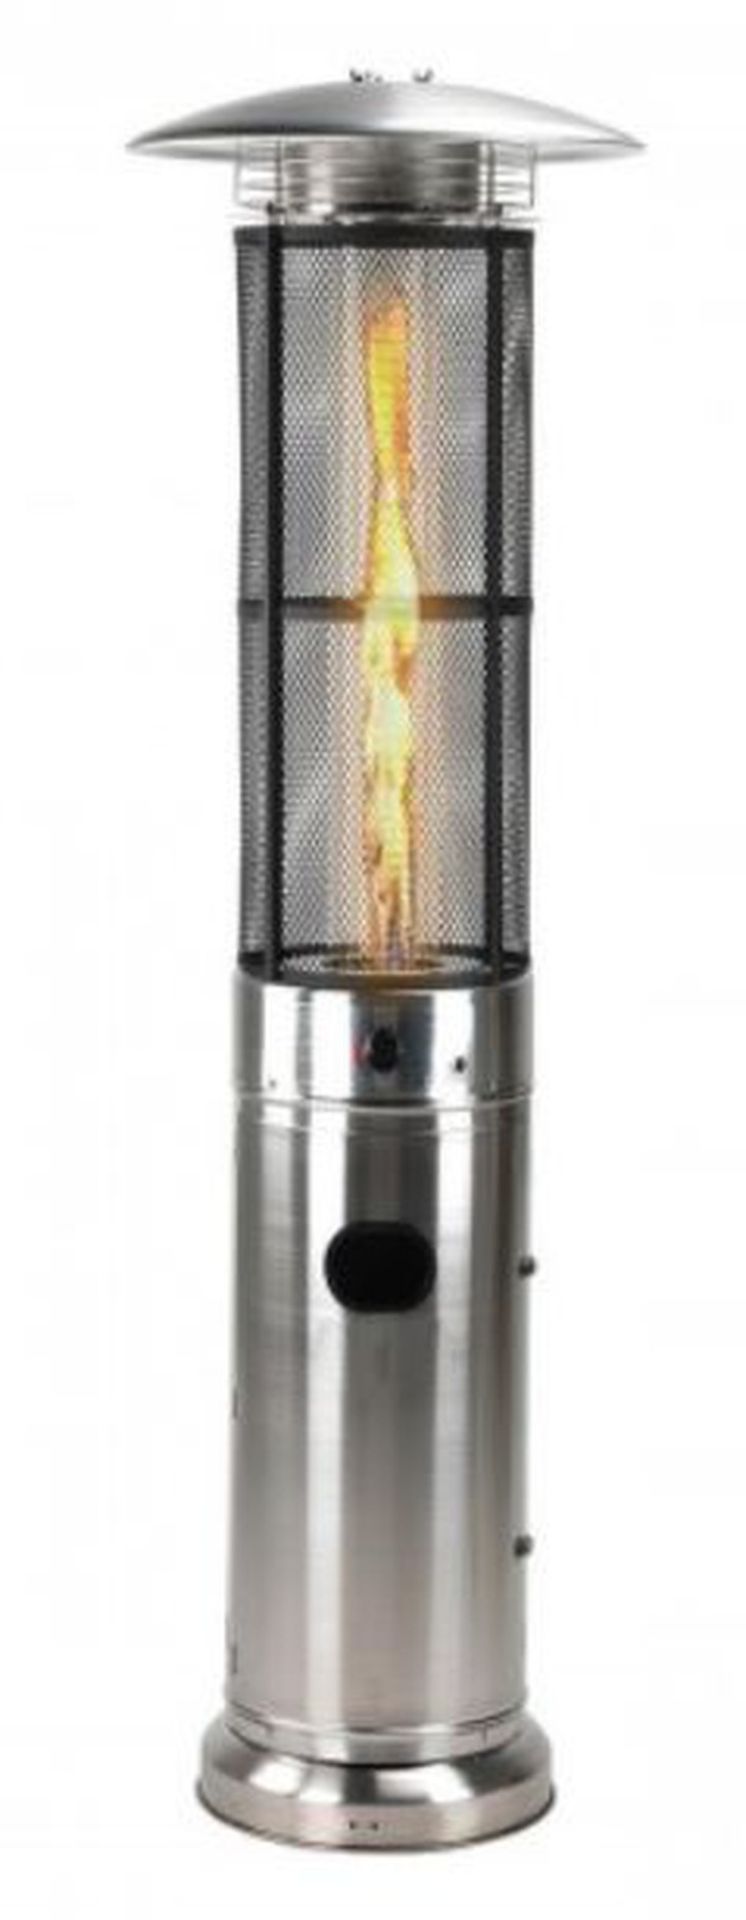 Professional Stainless Steel 15kw Flame Patio Heaters with Quartz Tube.